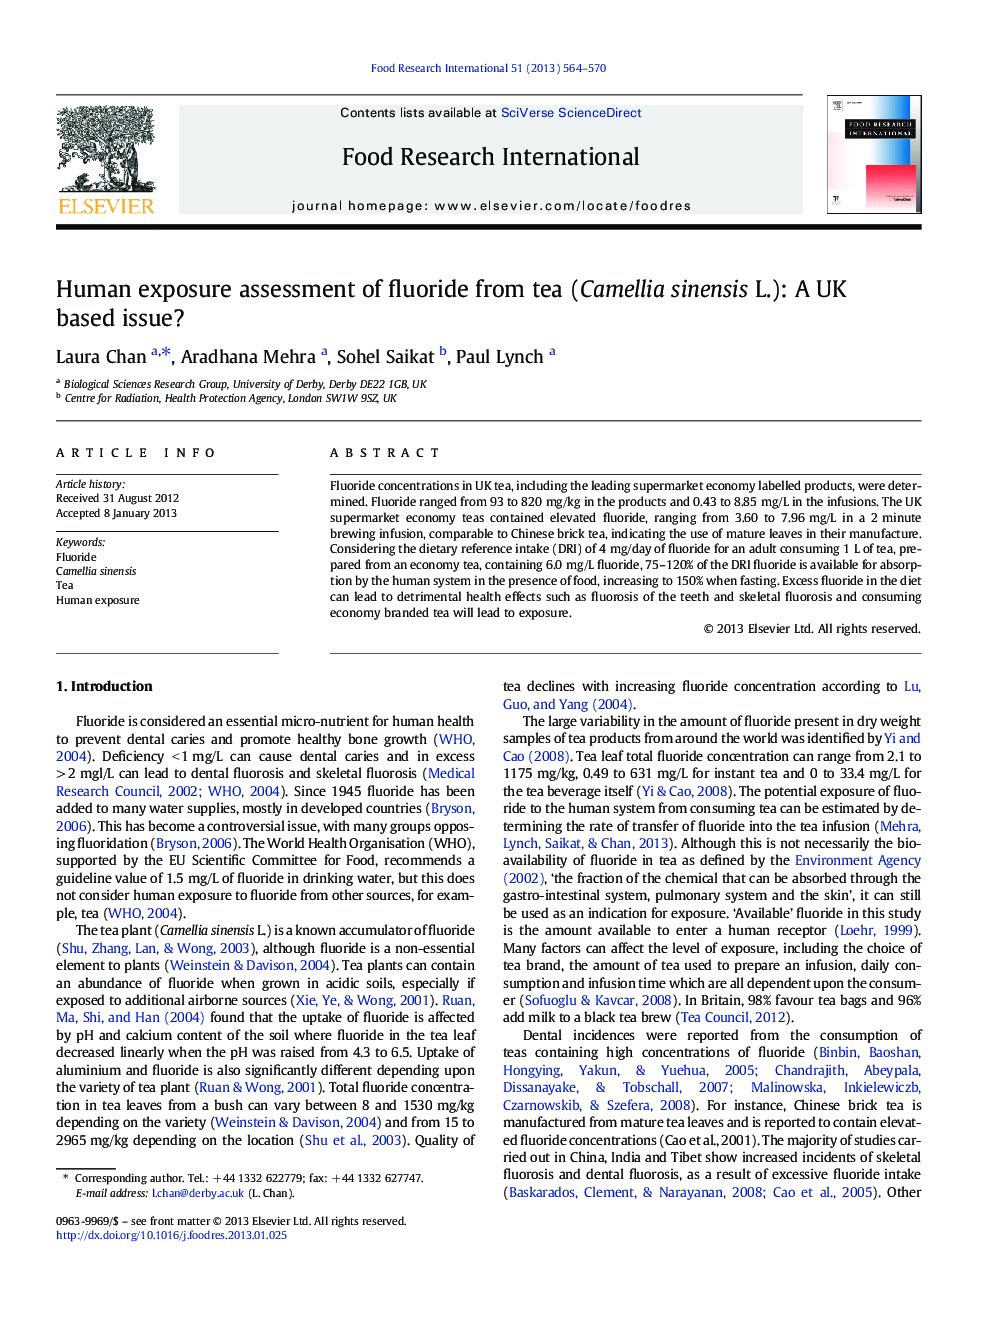 Human exposure assessment of fluoride from tea (Camellia sinensis L.): A UK based issue?